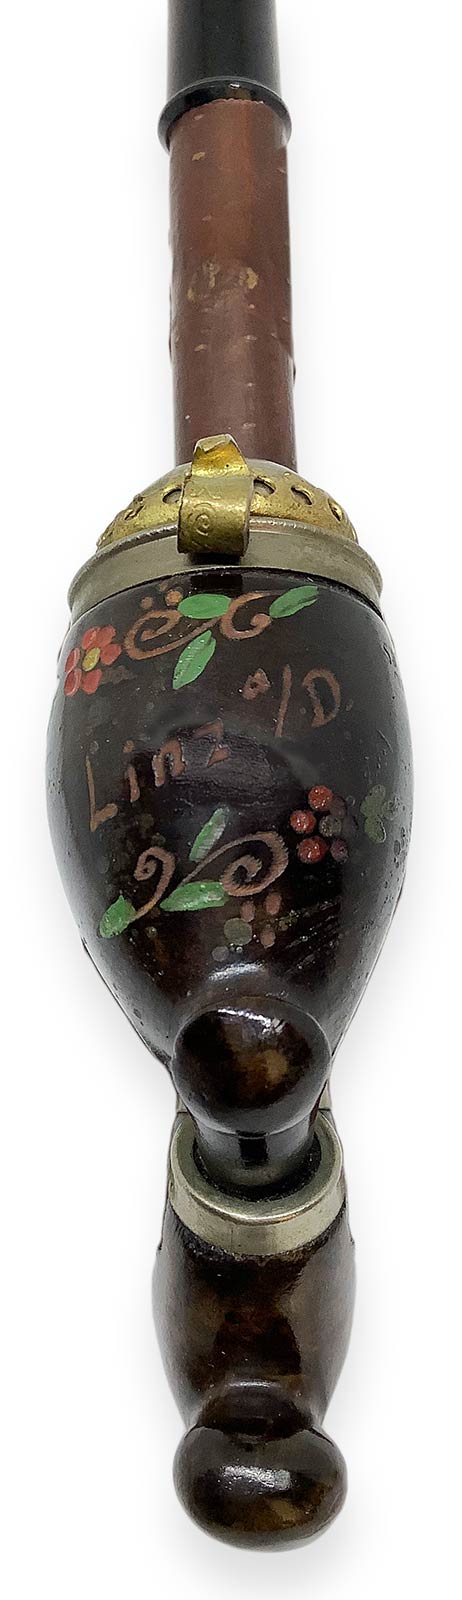 Walking pipe with Flowers - Linz, Germany. Early 1900s. Long walking pipe with briarwood tobacco - Image 3 of 6